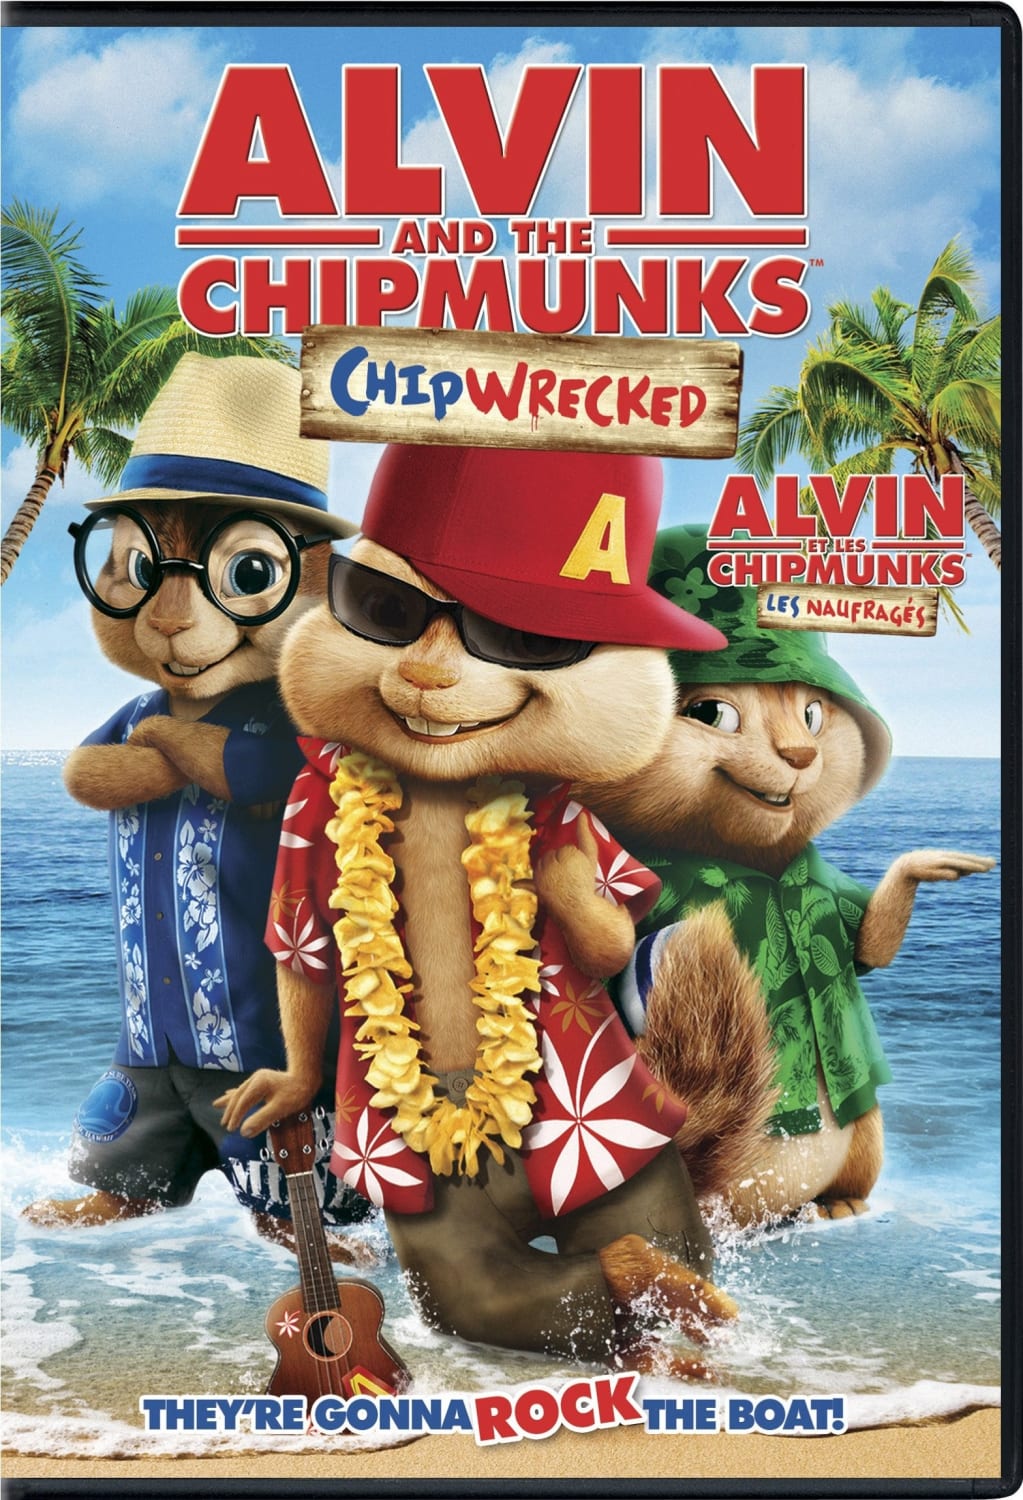 Alvin and the Chipmunks – Chipwrecked (DVD) on MovieShack